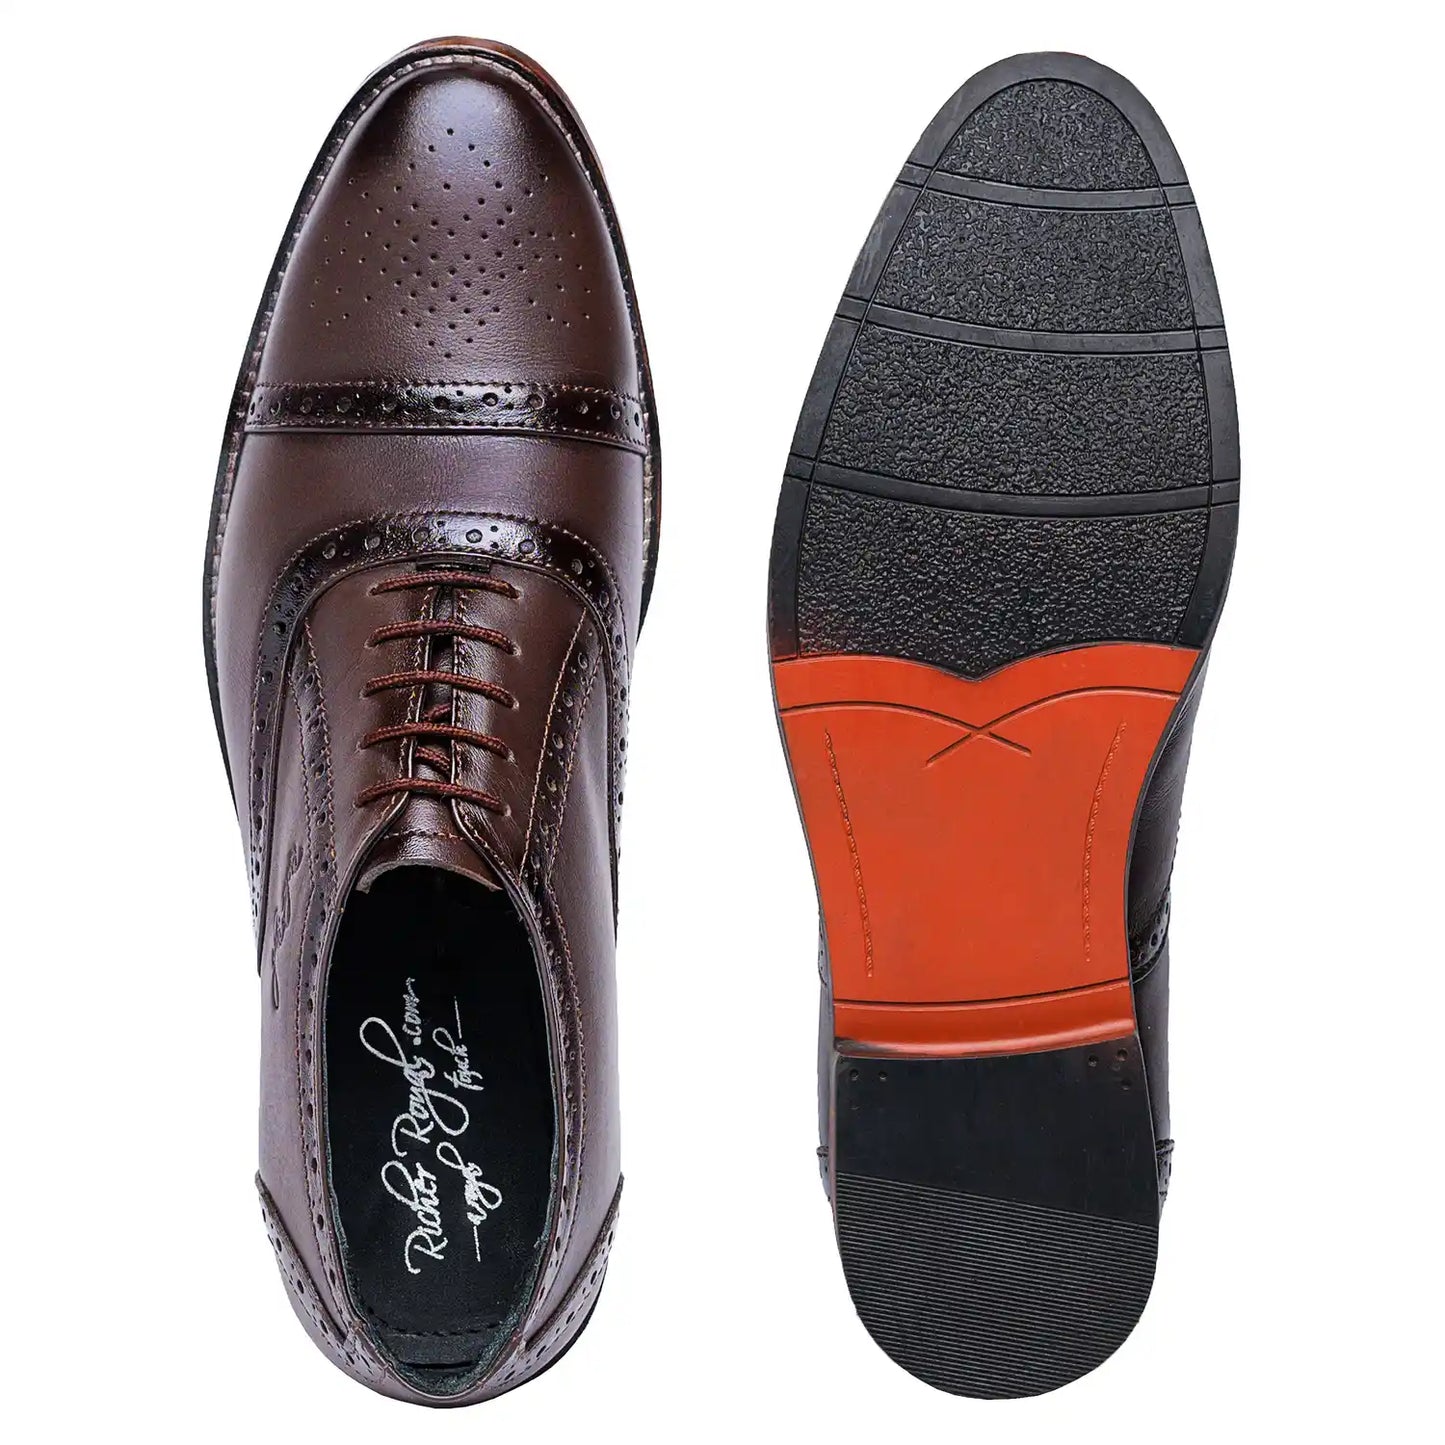 Genuine Leather Oxford Brogue Lace Up Shoes